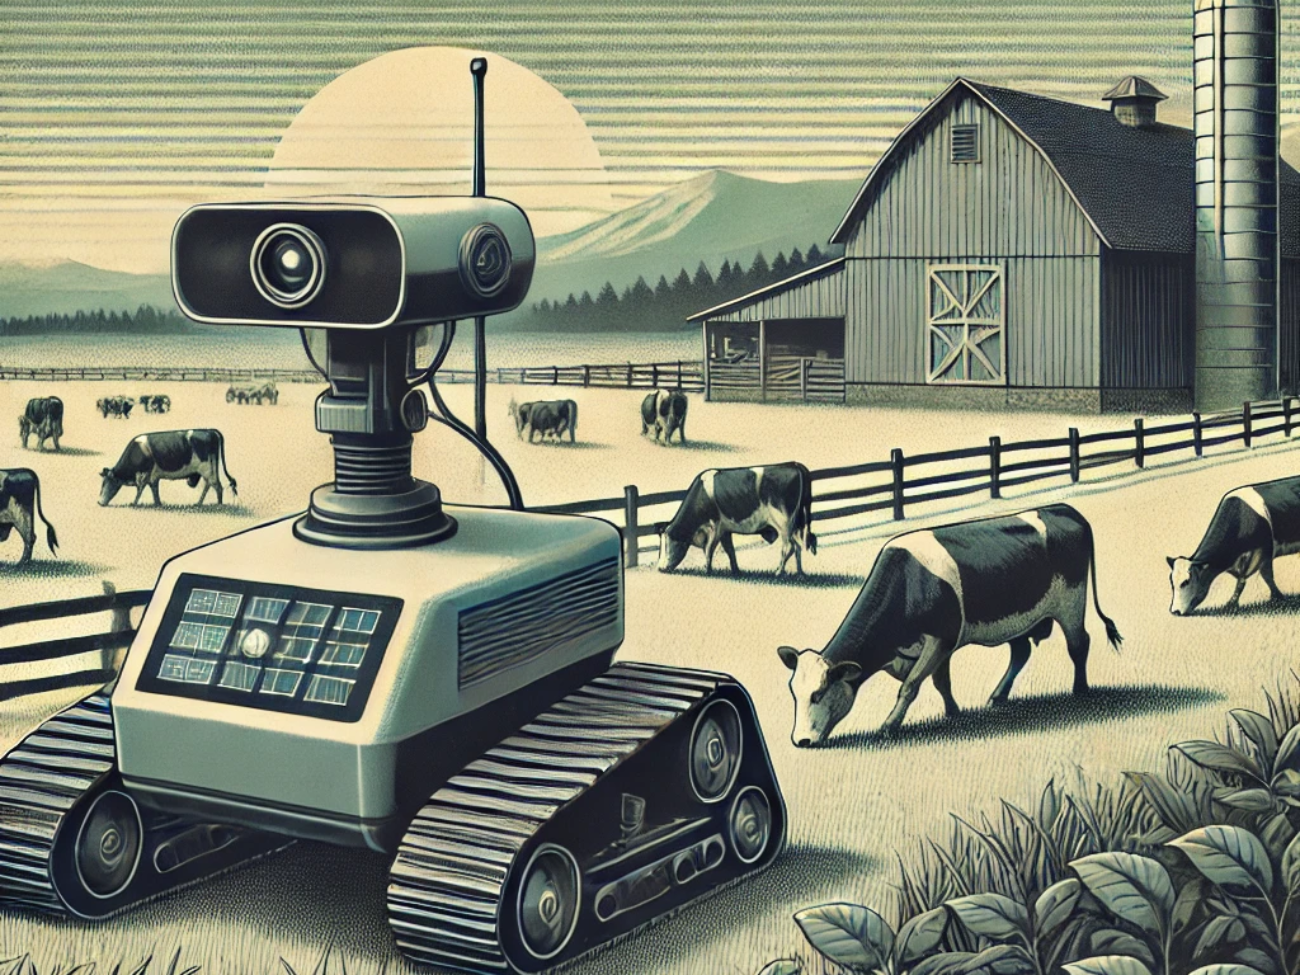 DALL·E 2024-06-25 09.19.02 - 1970s style illustration depicting a robotic system monitoring livestock on a farm. The scene features a robotic device equipped with sensors navigati